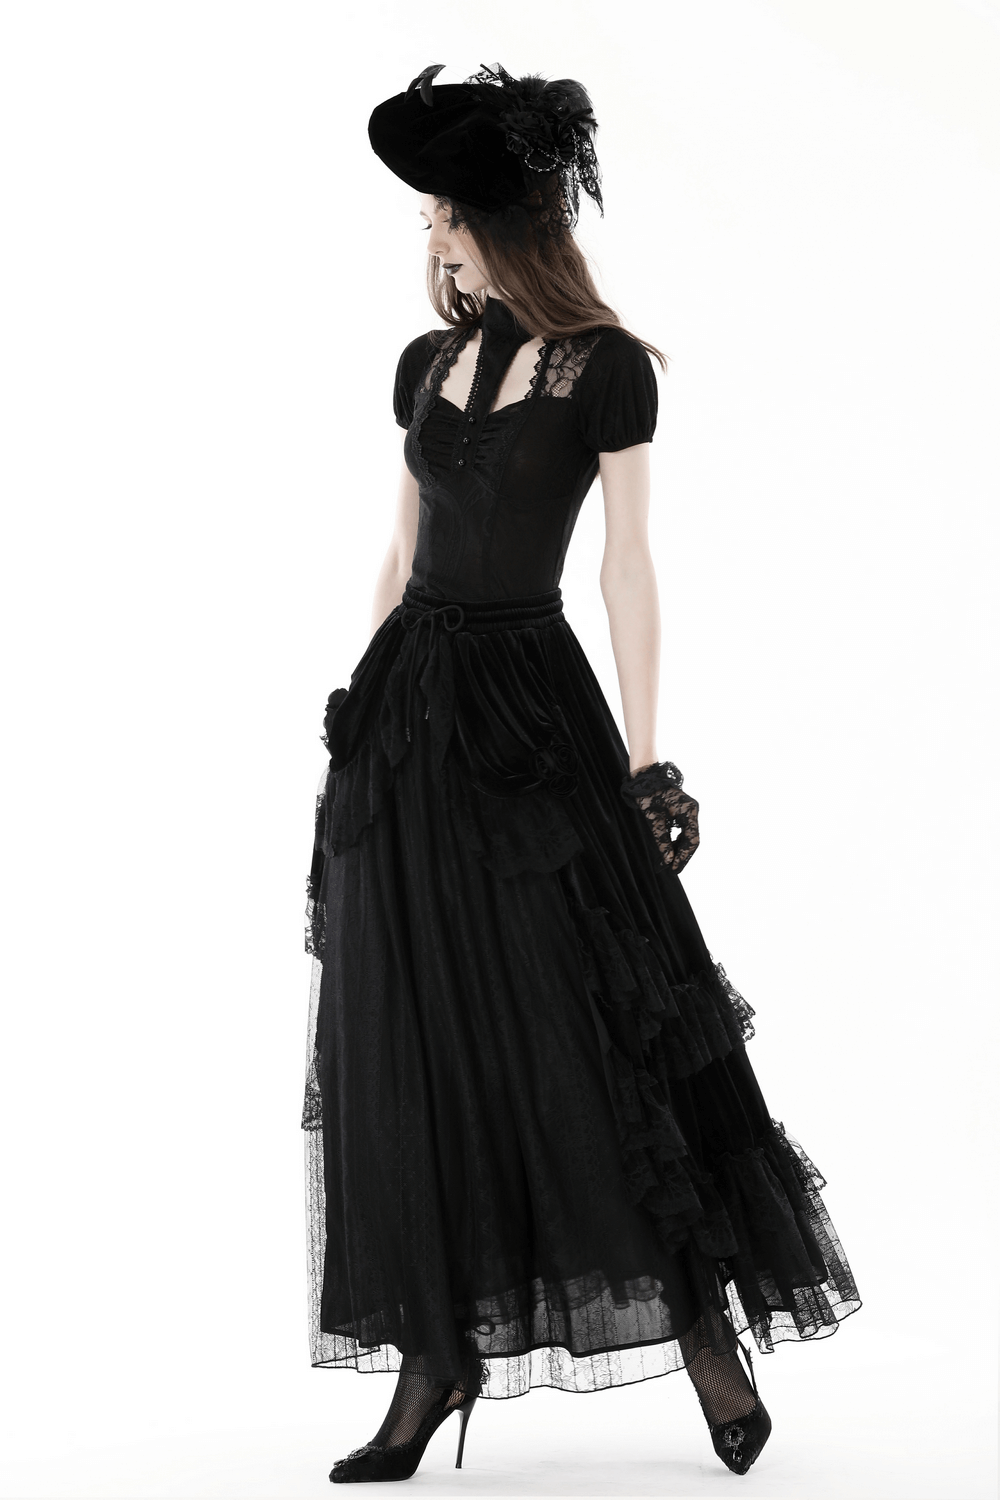 Dark Romantic Gothic Lace Top With Short Sleeves